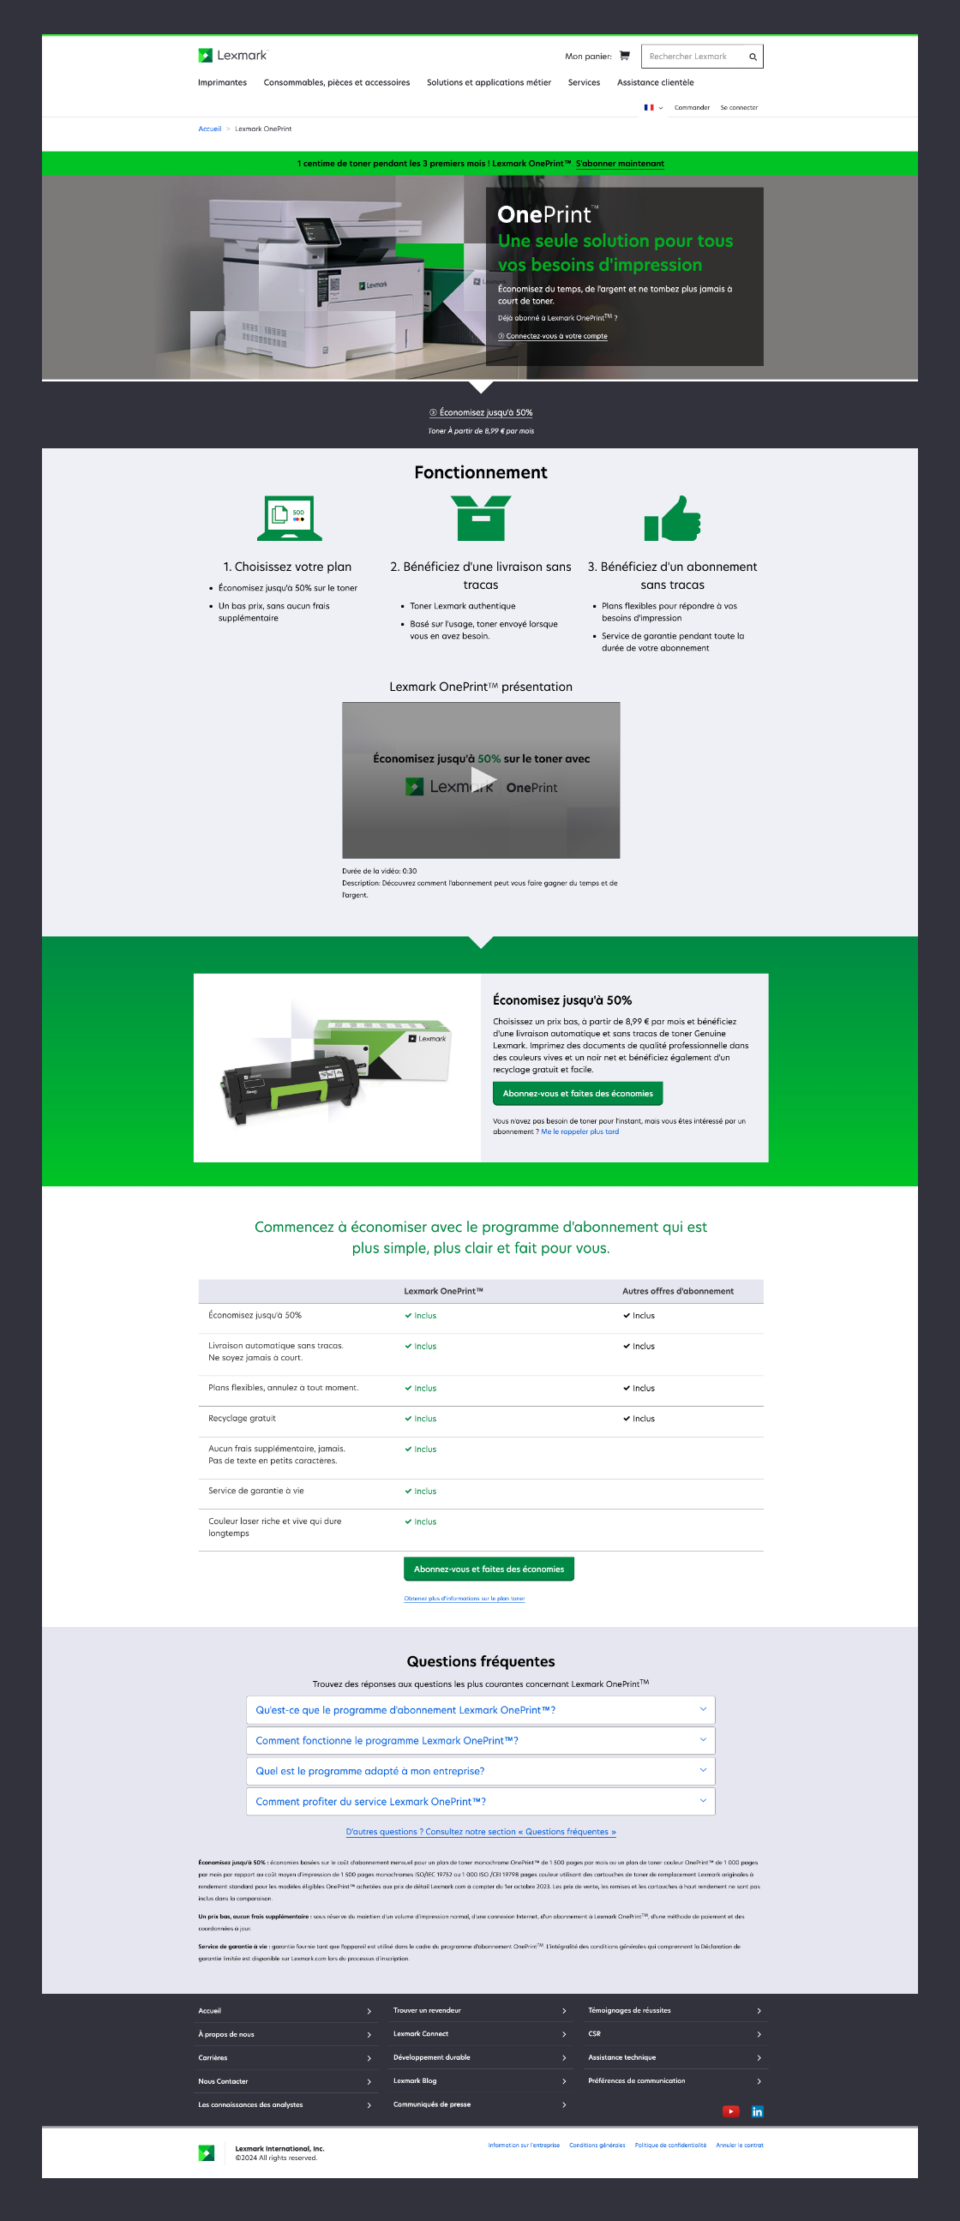 OnePrint French landing page